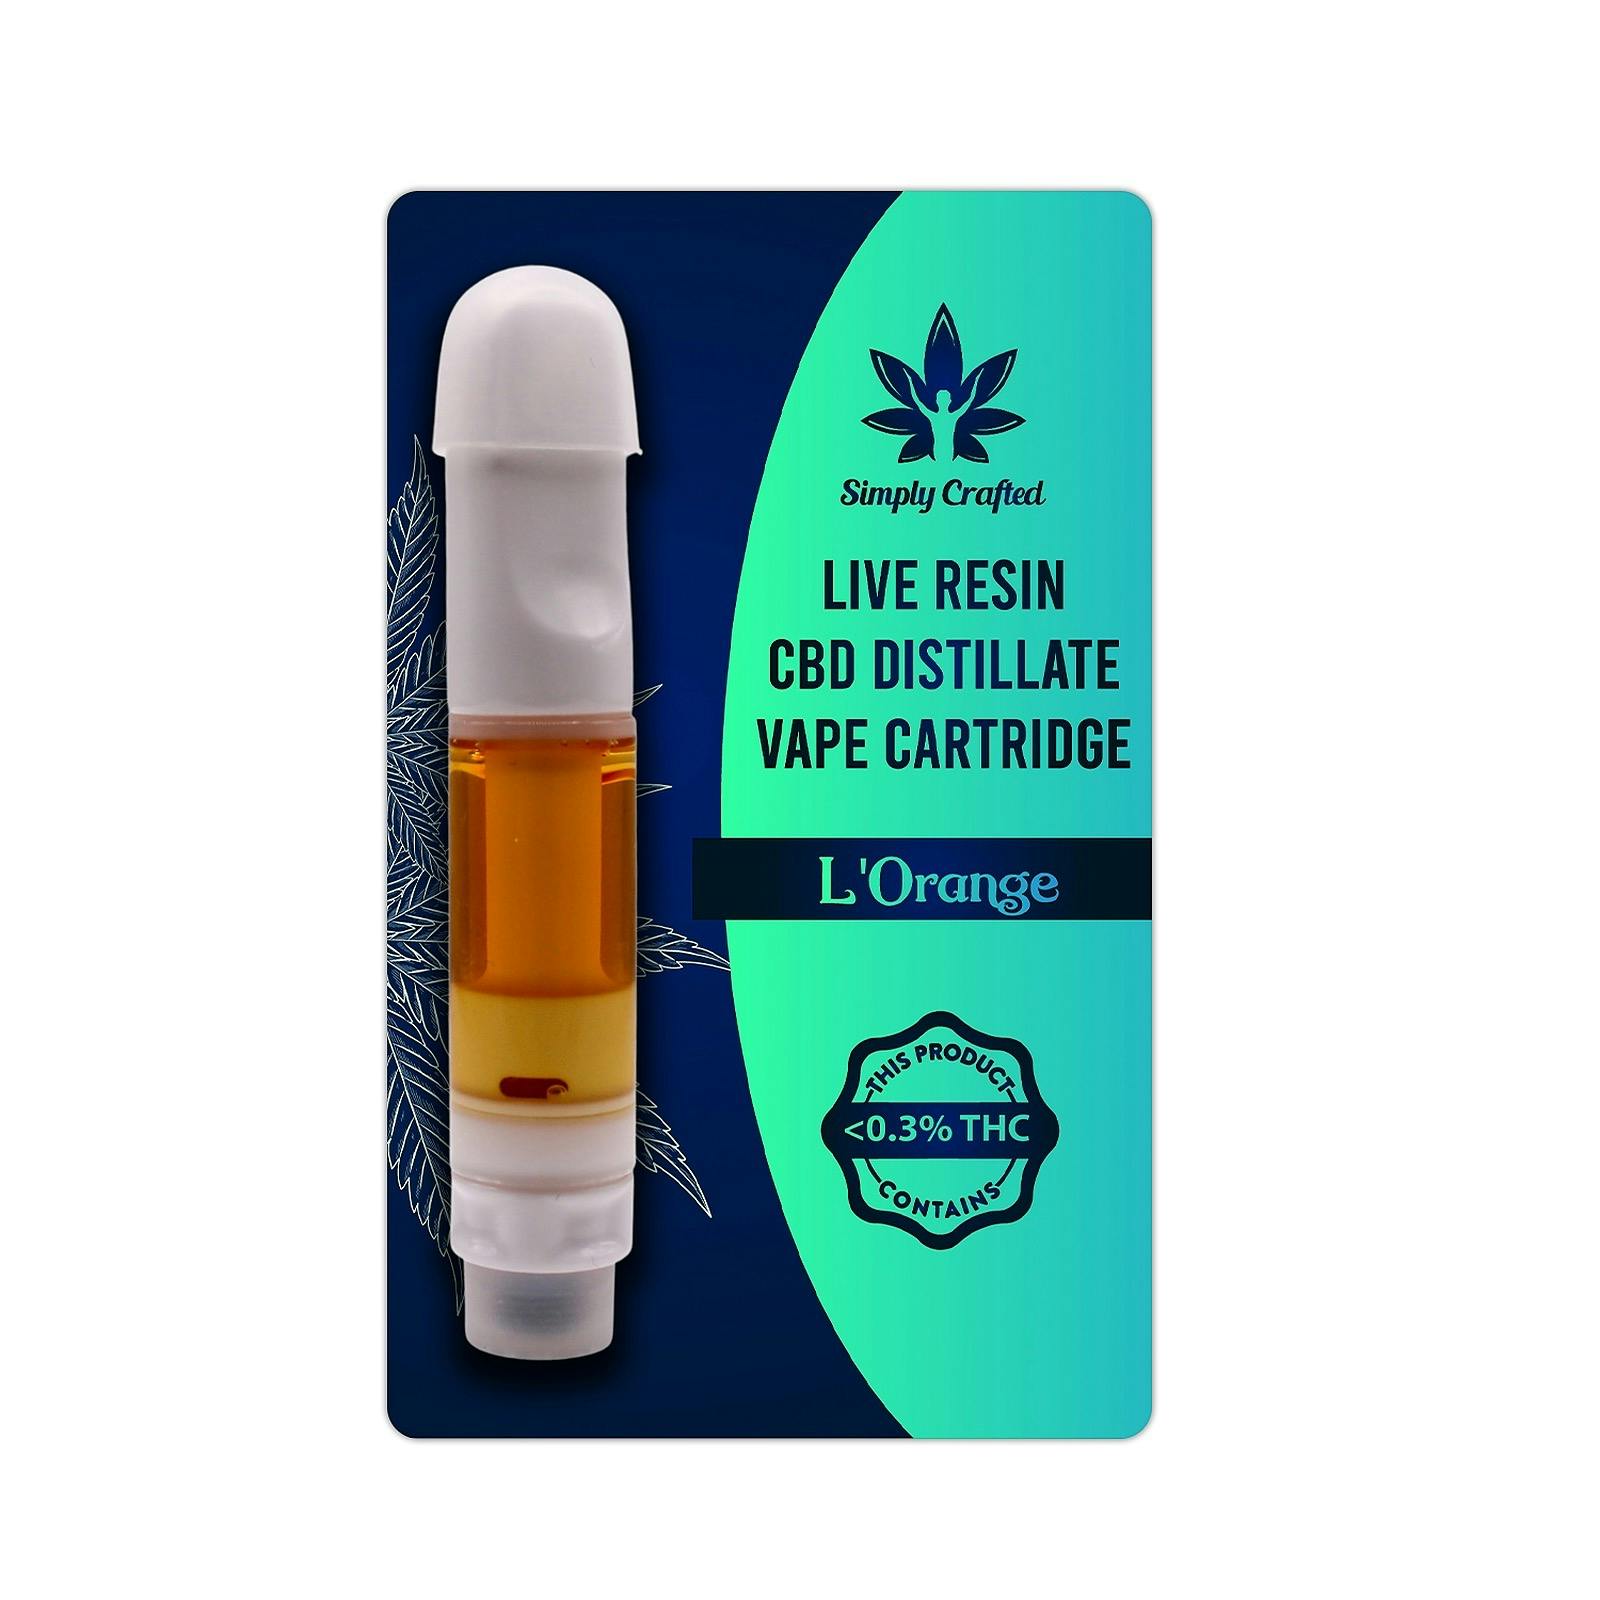 Simply Crafted Free Shipping 25 Off With Code Leafly Lorange Live Resin Cbd Distillate 2515